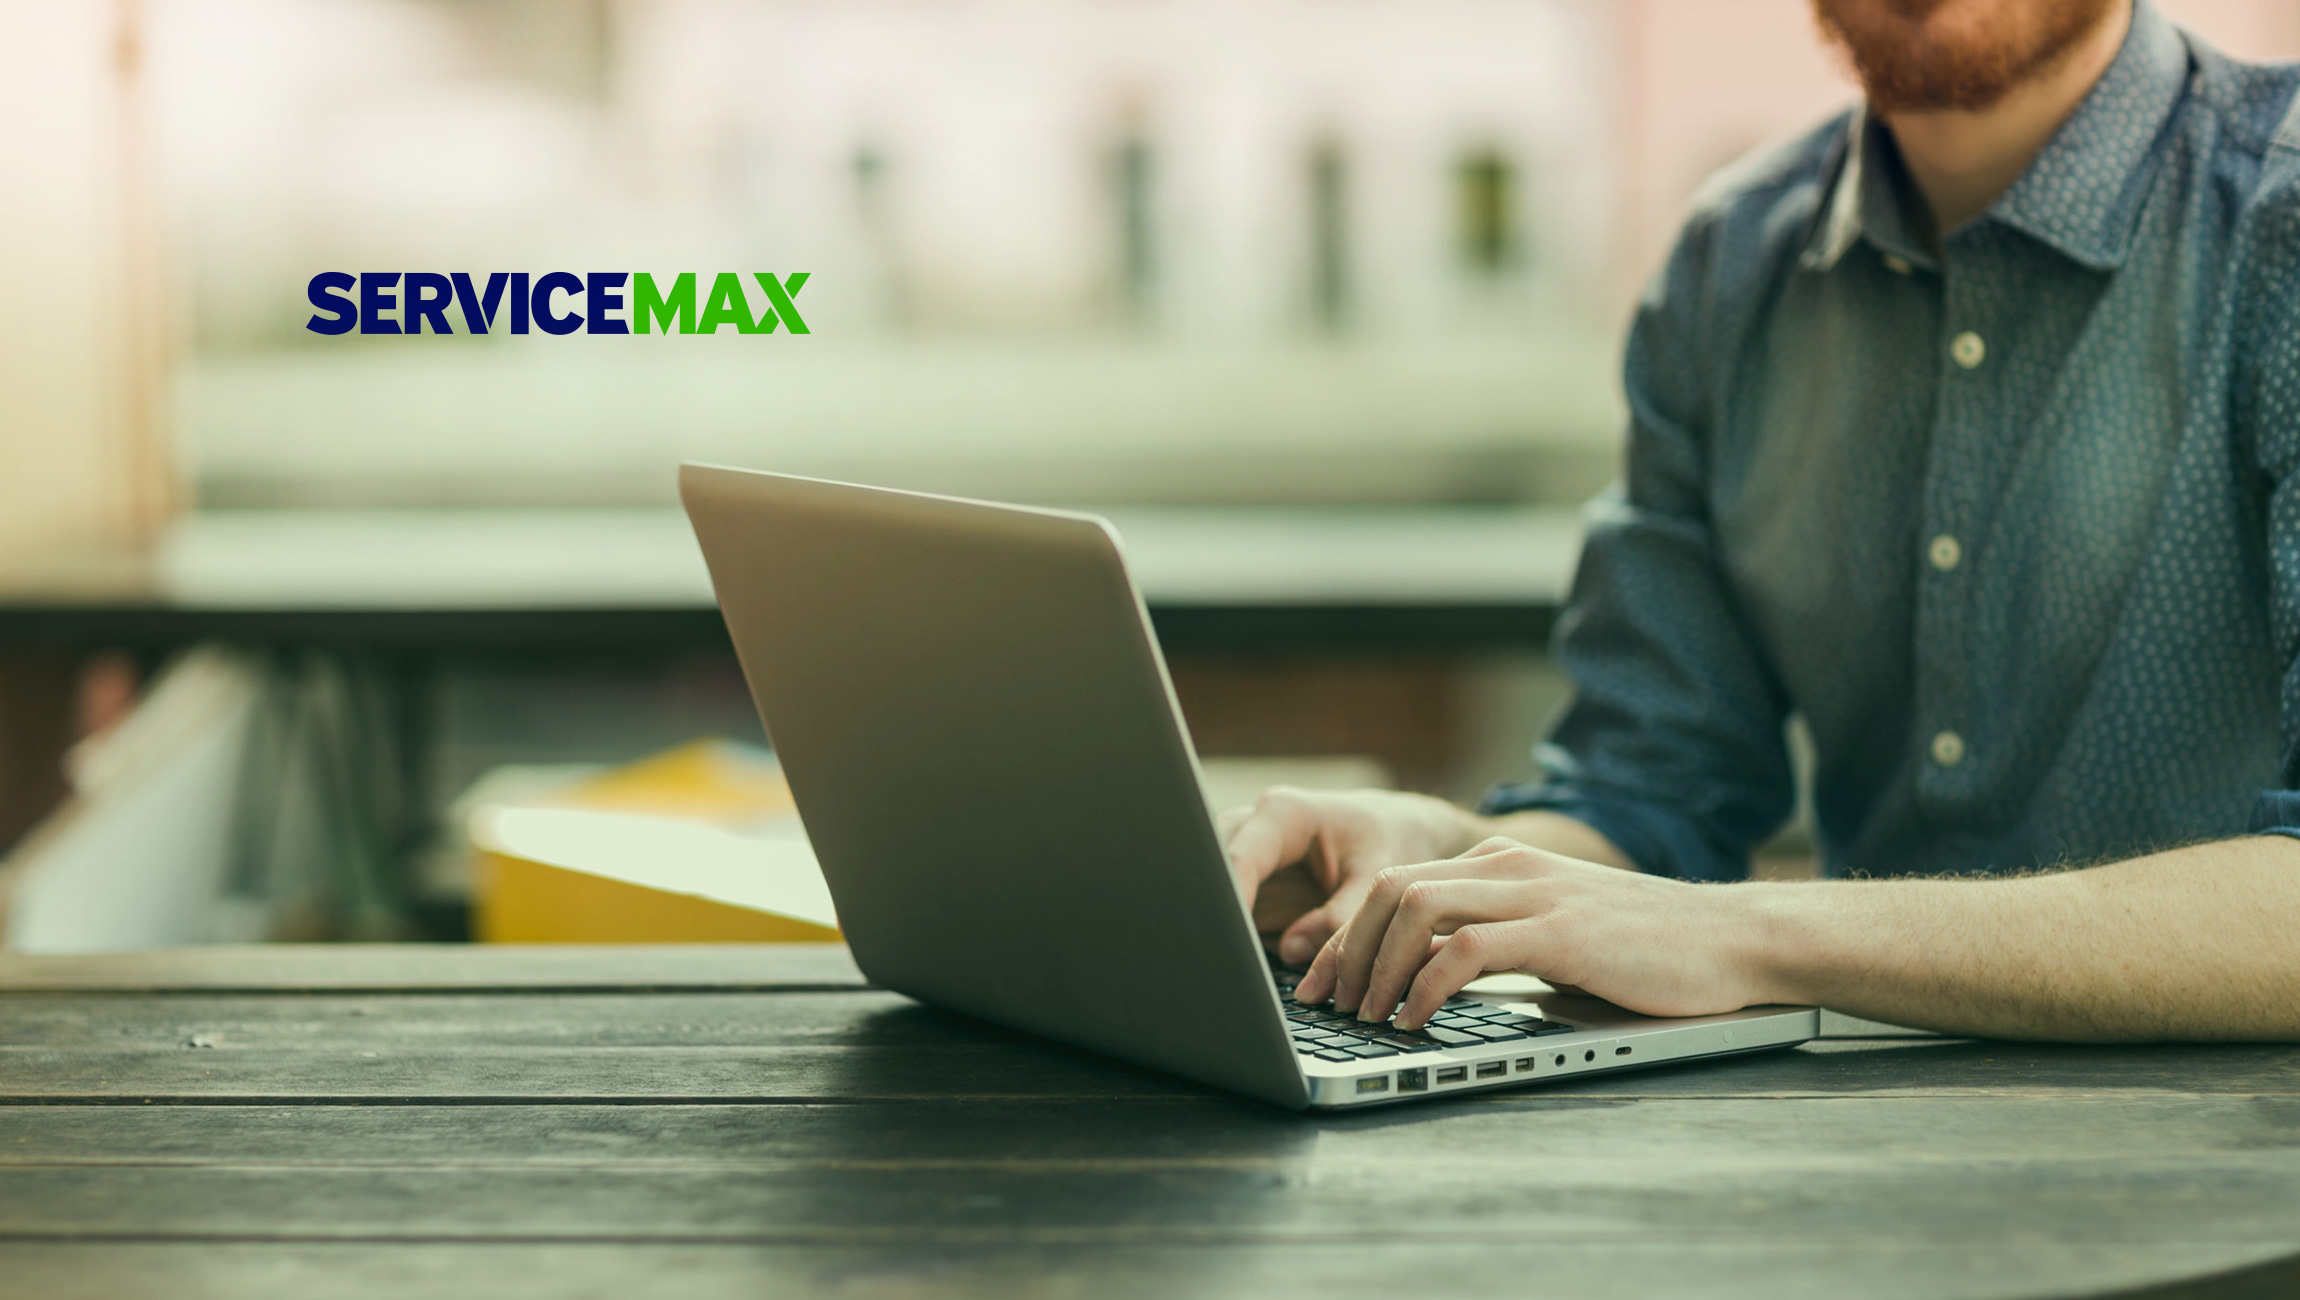 ServiceMax Releases New App ServiceMax Engage to Connect Service Organizations With Their End Customers